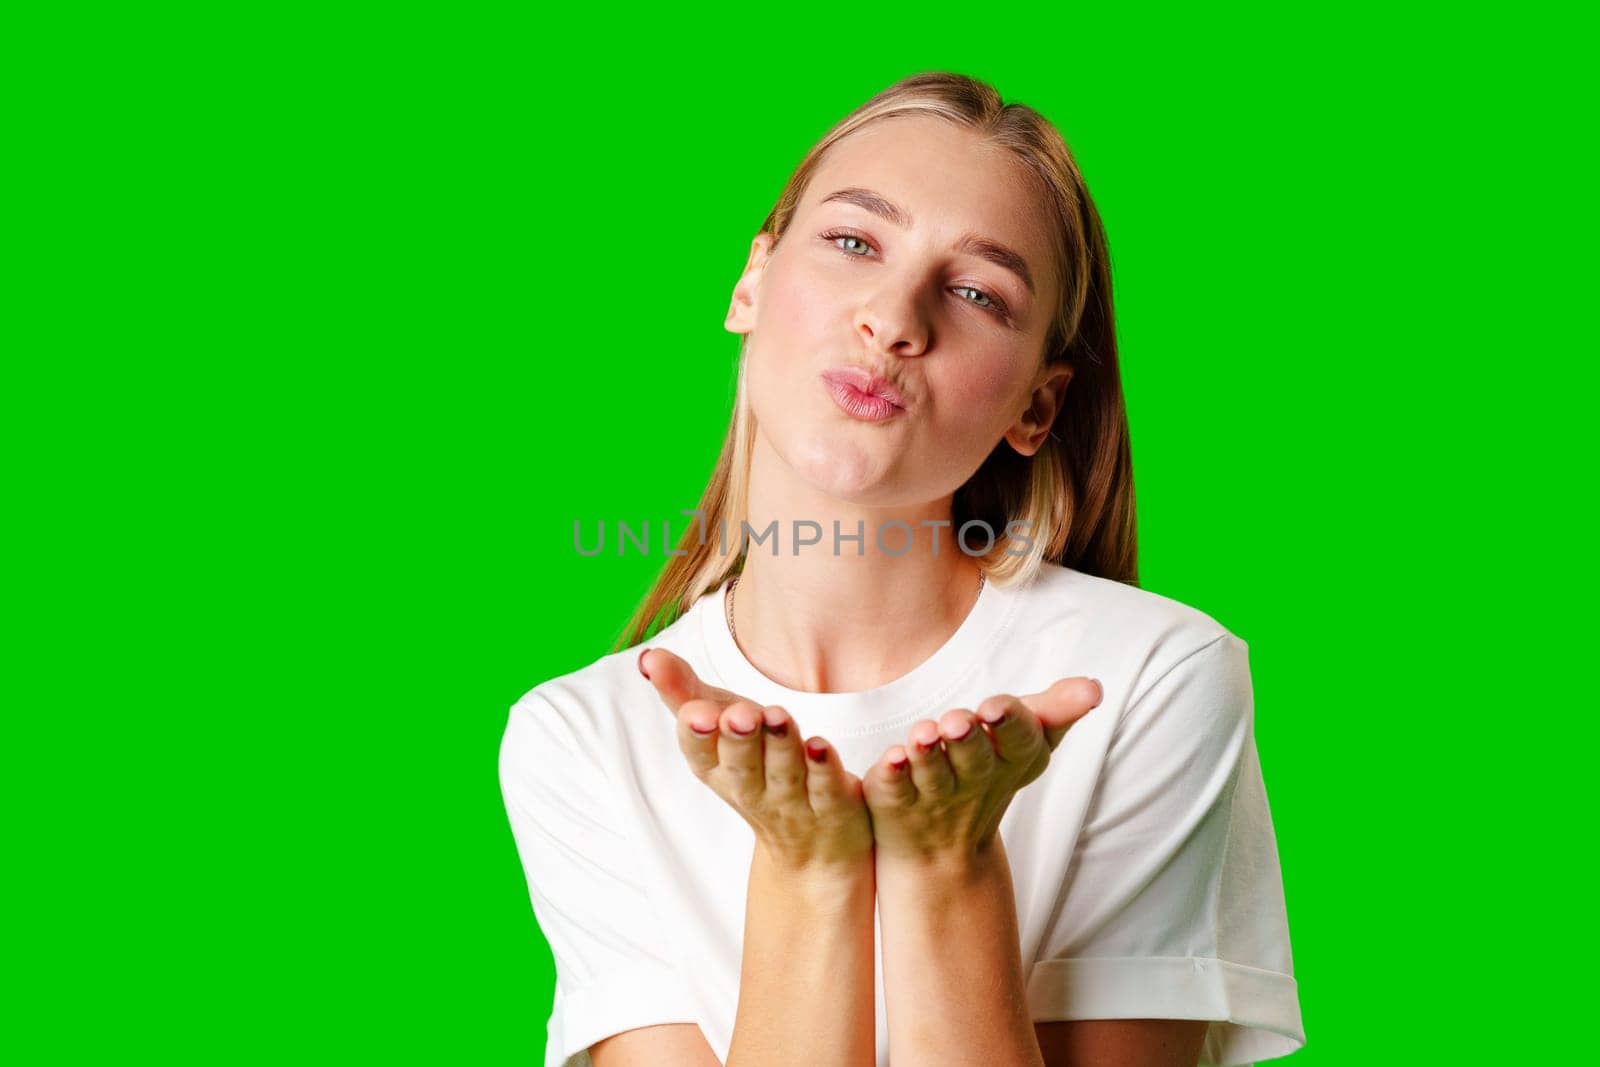 Young Woman Blowing a Kiss With a Playful Expression Against a Bright Green Background by Fabrikasimf